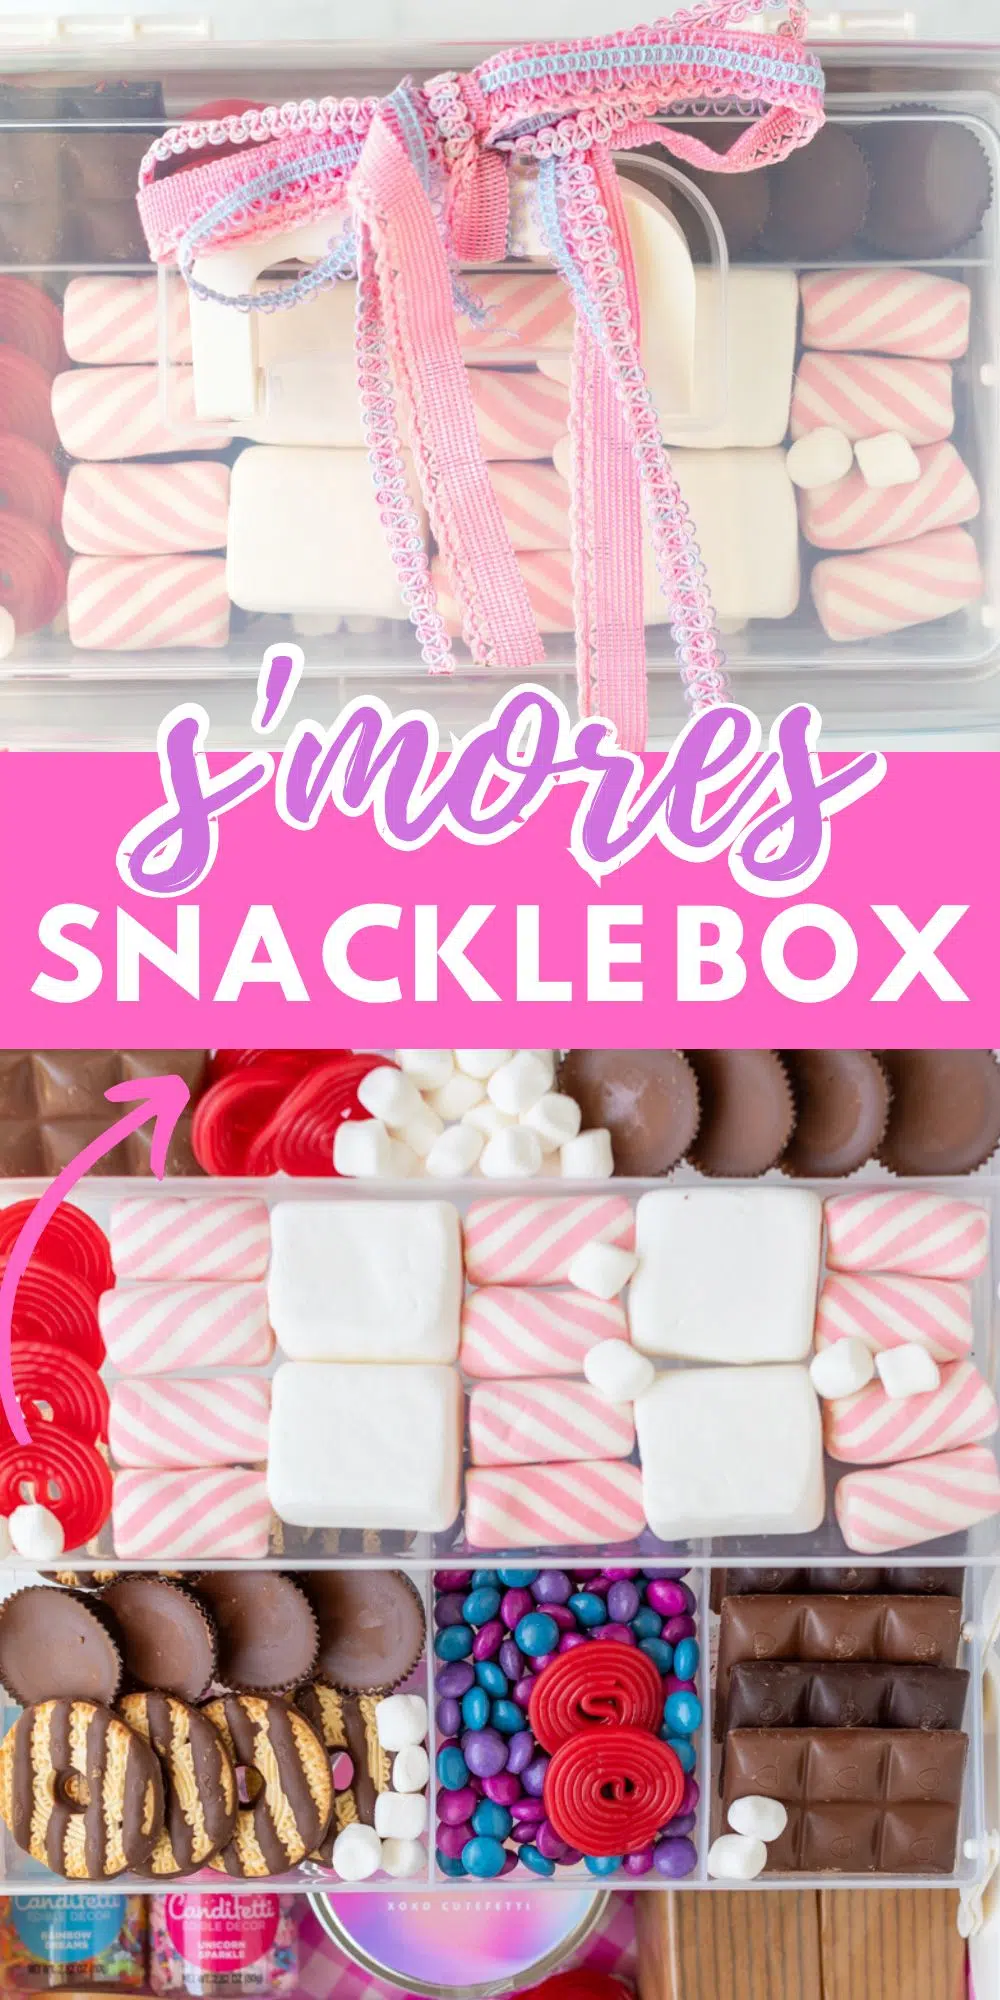 Snackle Box - Pink